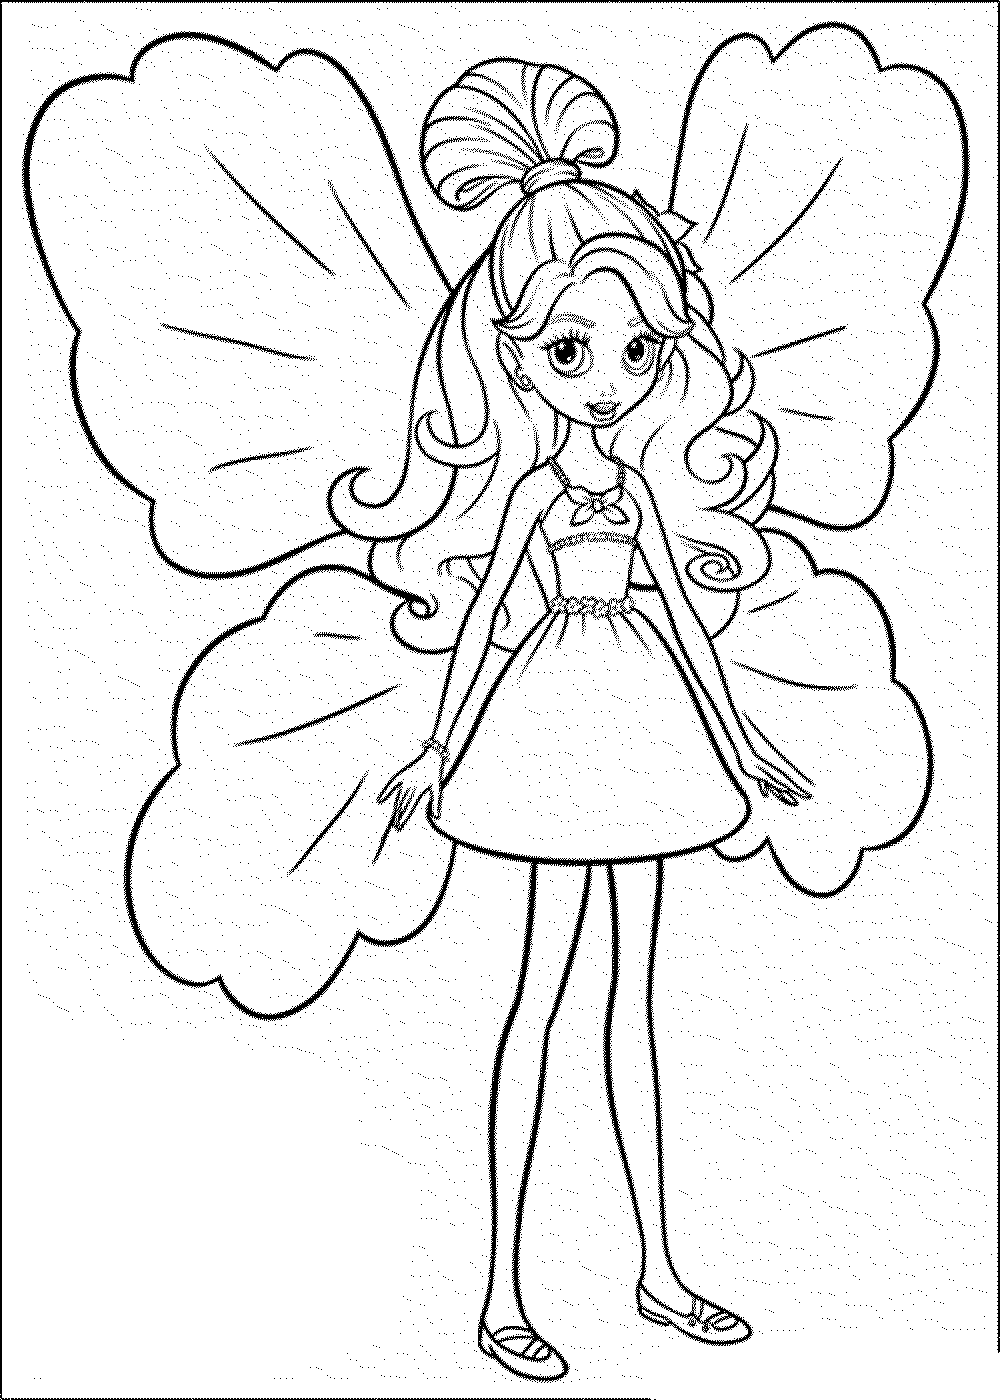 Barbie Cartoon Coloring Pages For Girls - Coloring Pages For All Ages -  Coloring Home